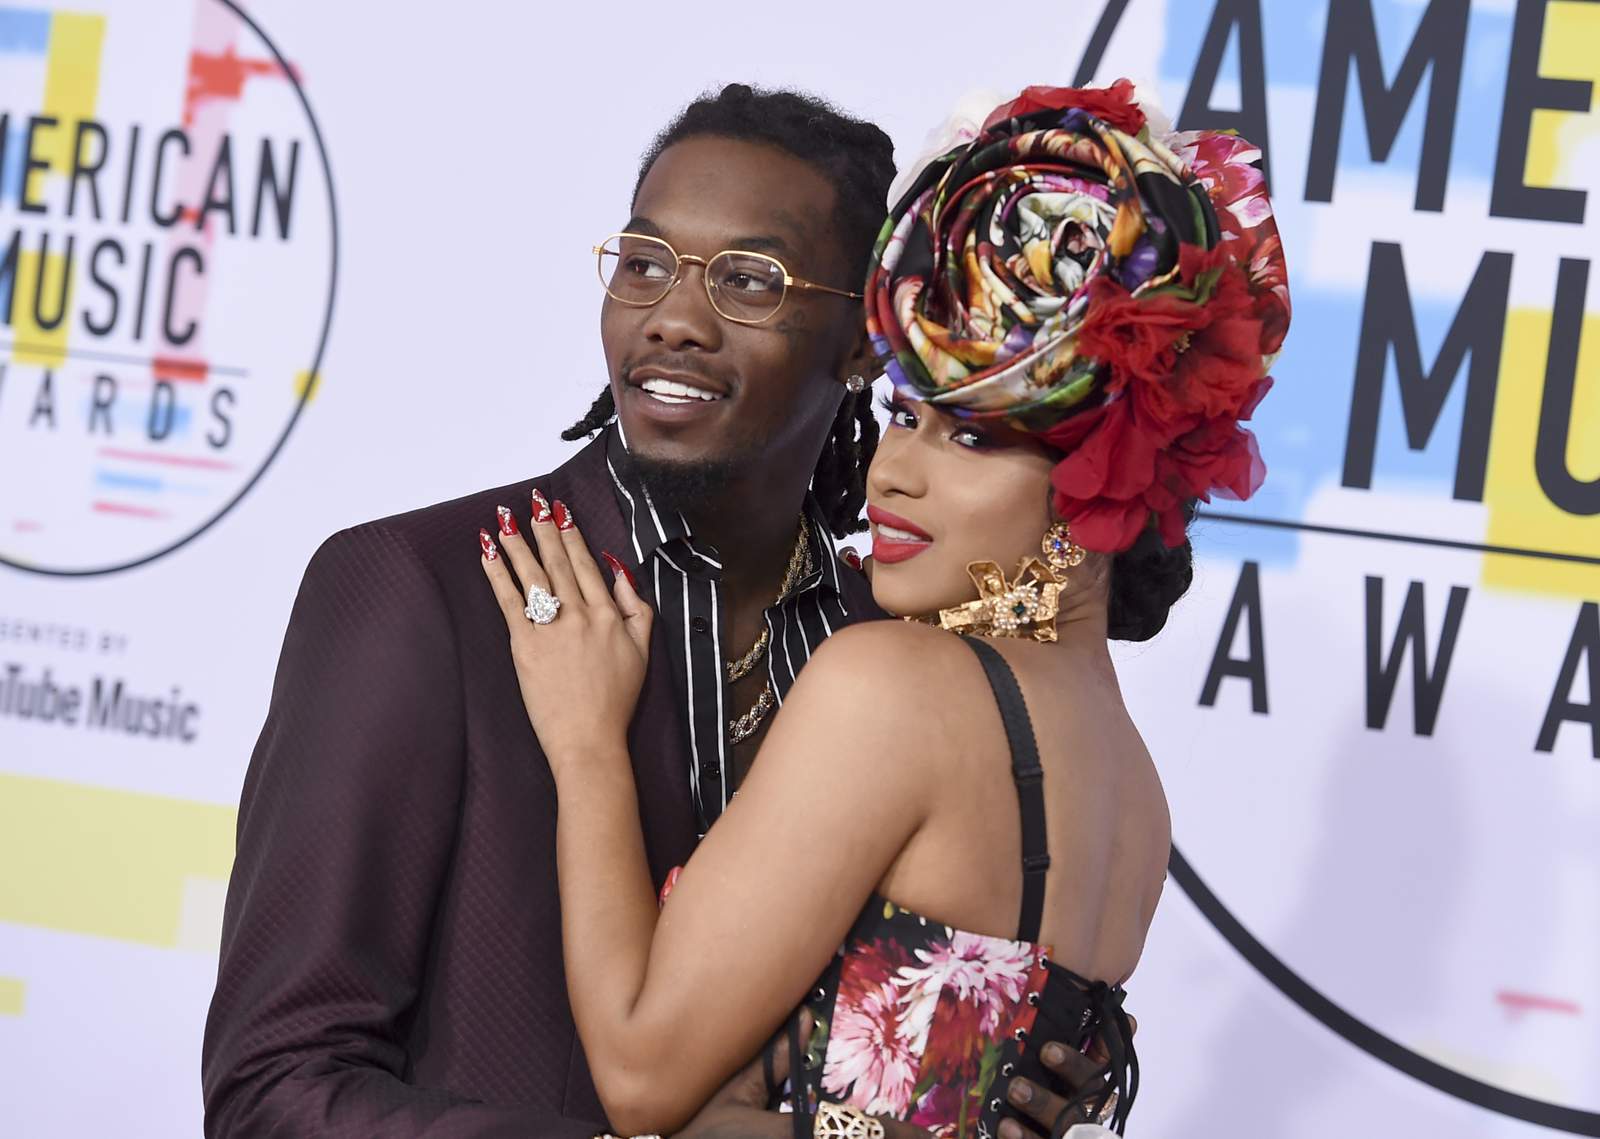 Cardi B files for divorce from Migos’ rapper Offset